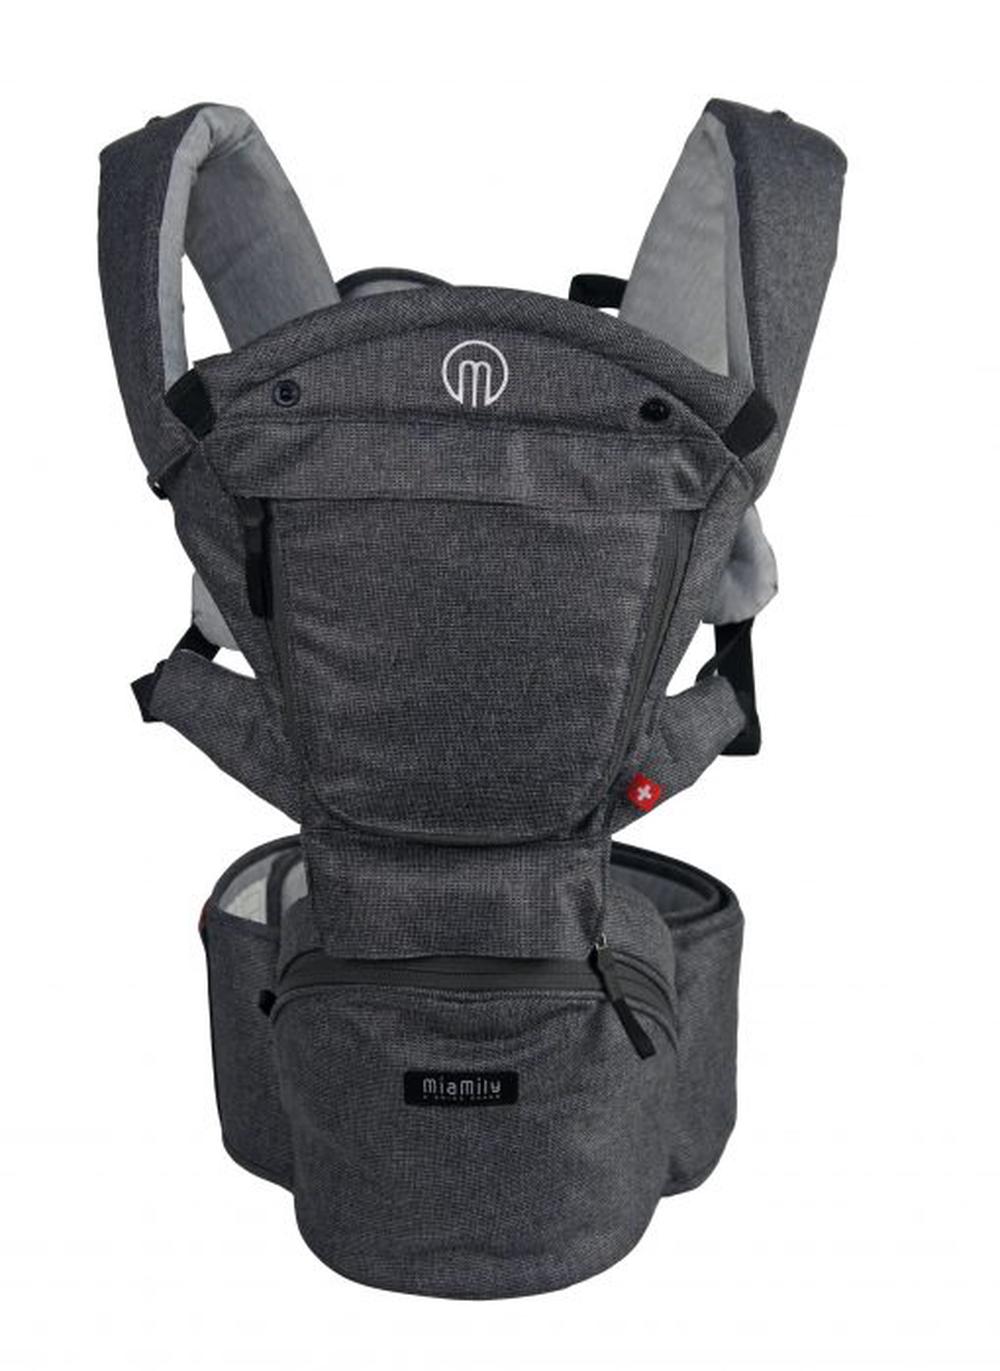 miamily baby carrier